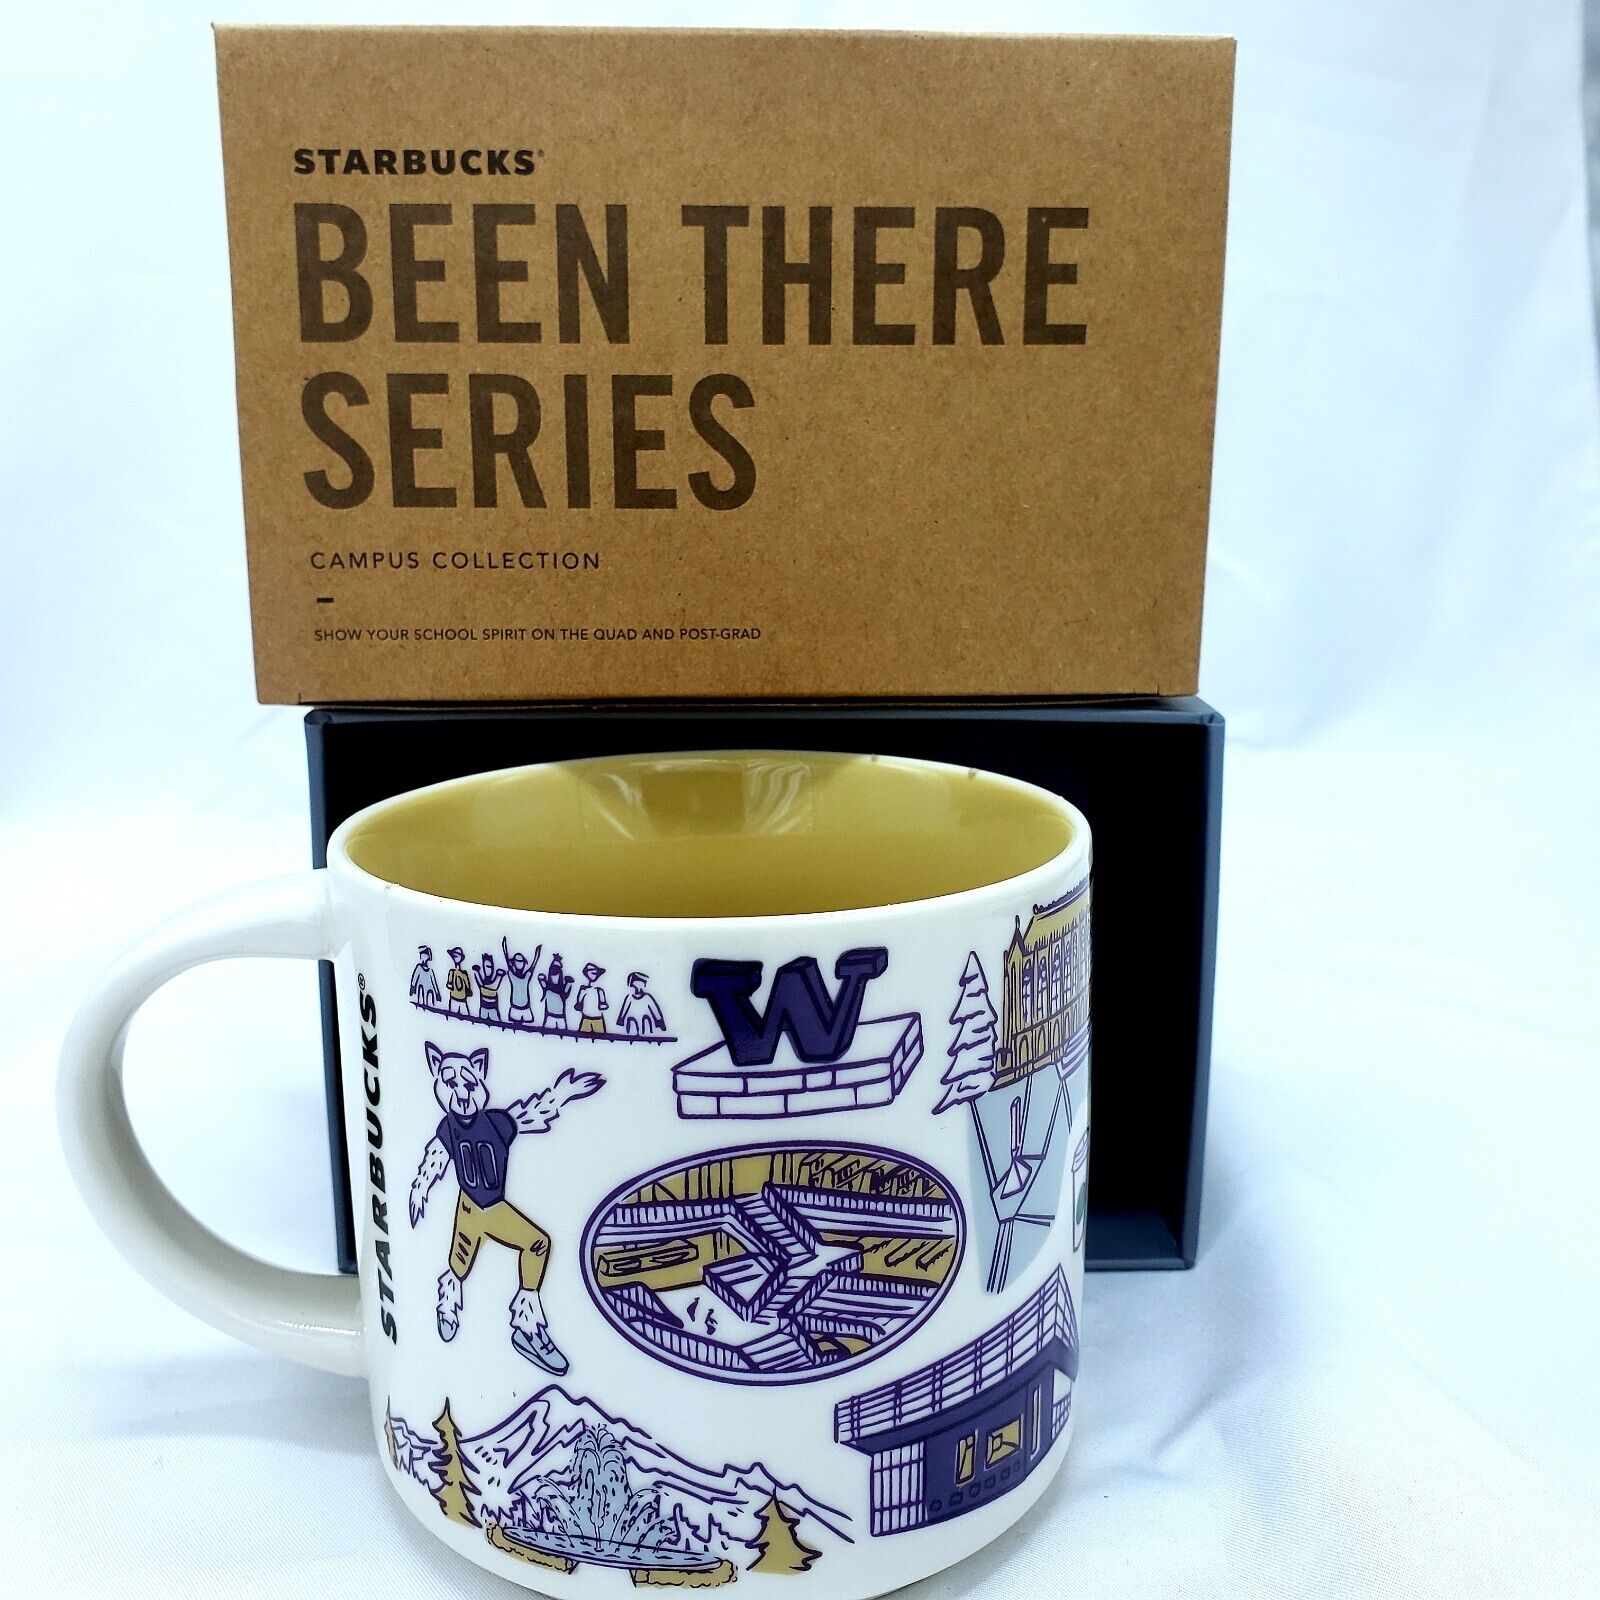 Starbucks Been There Series Campus Collection University of Washinton Mug